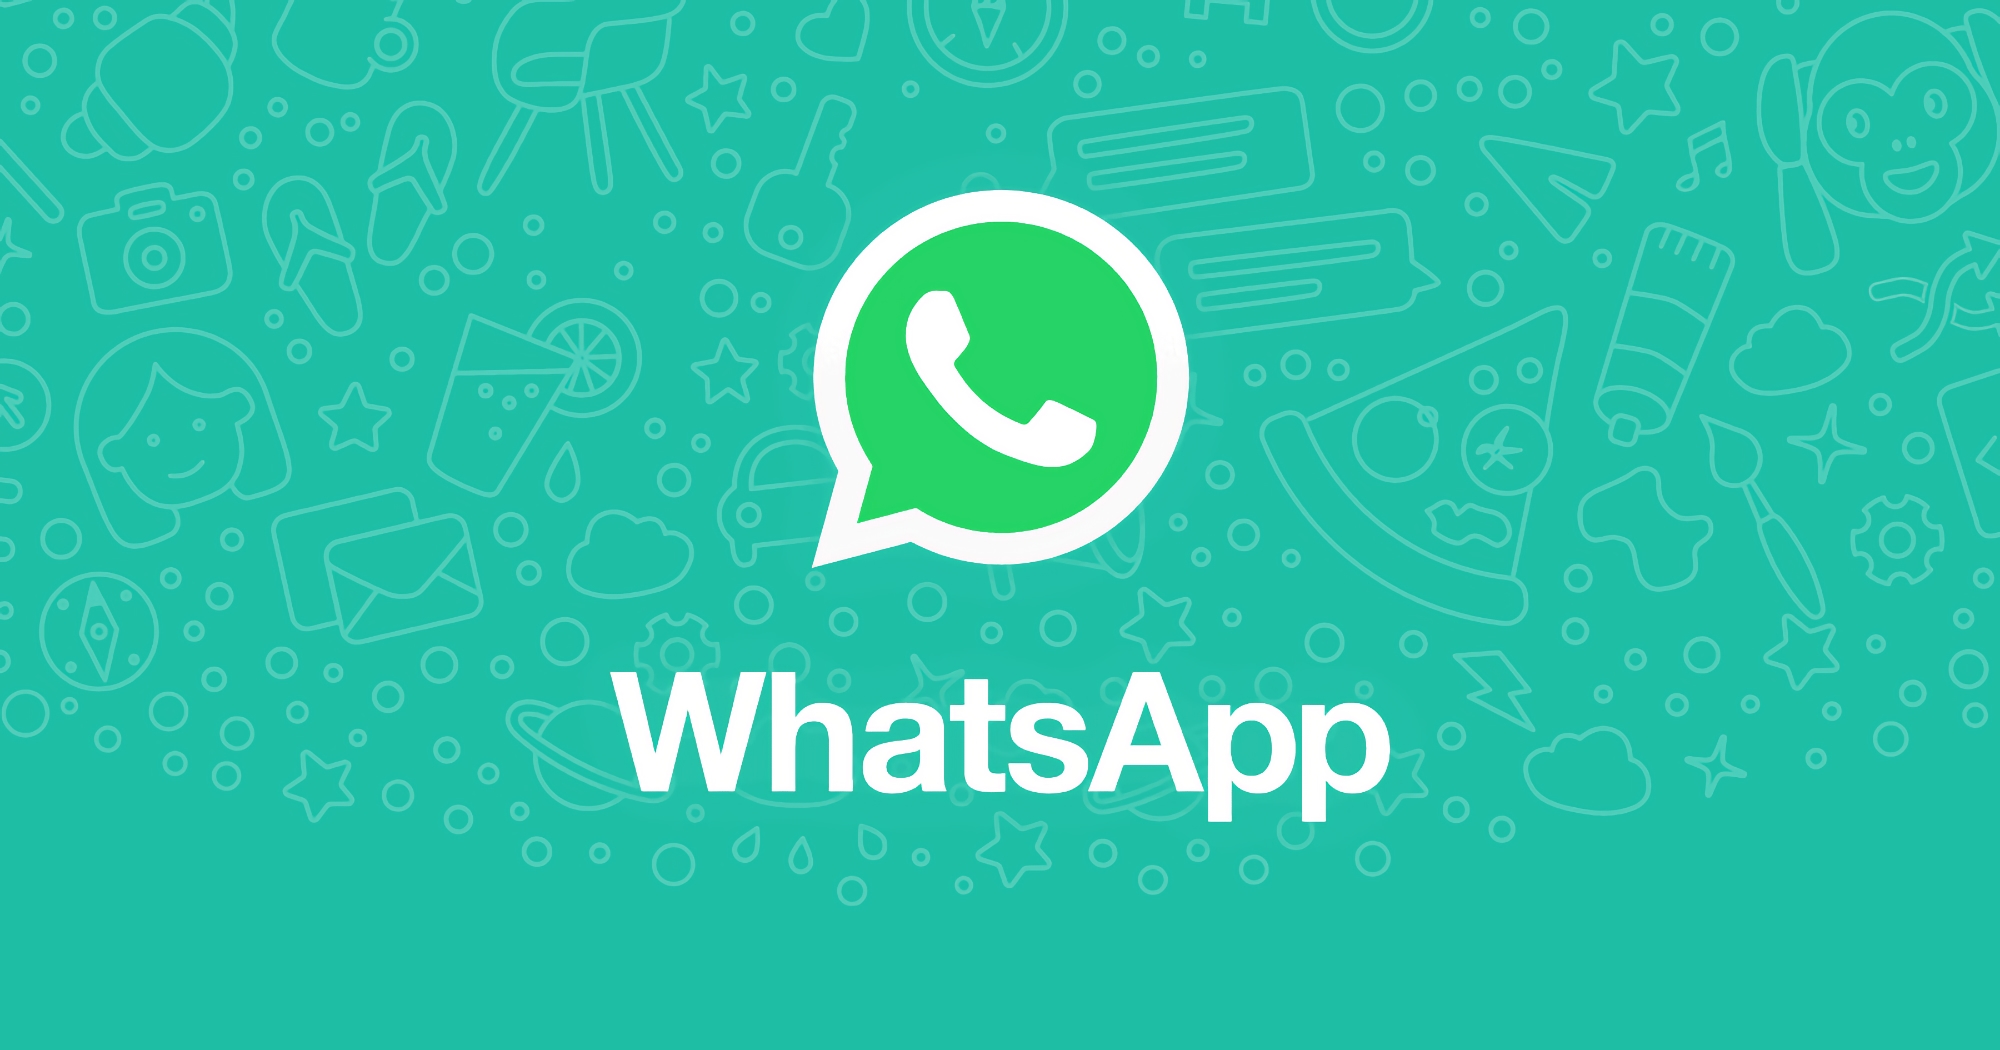 WhatsApp is working on a Companion Mode that will allow you to use the messenger on two smartphones